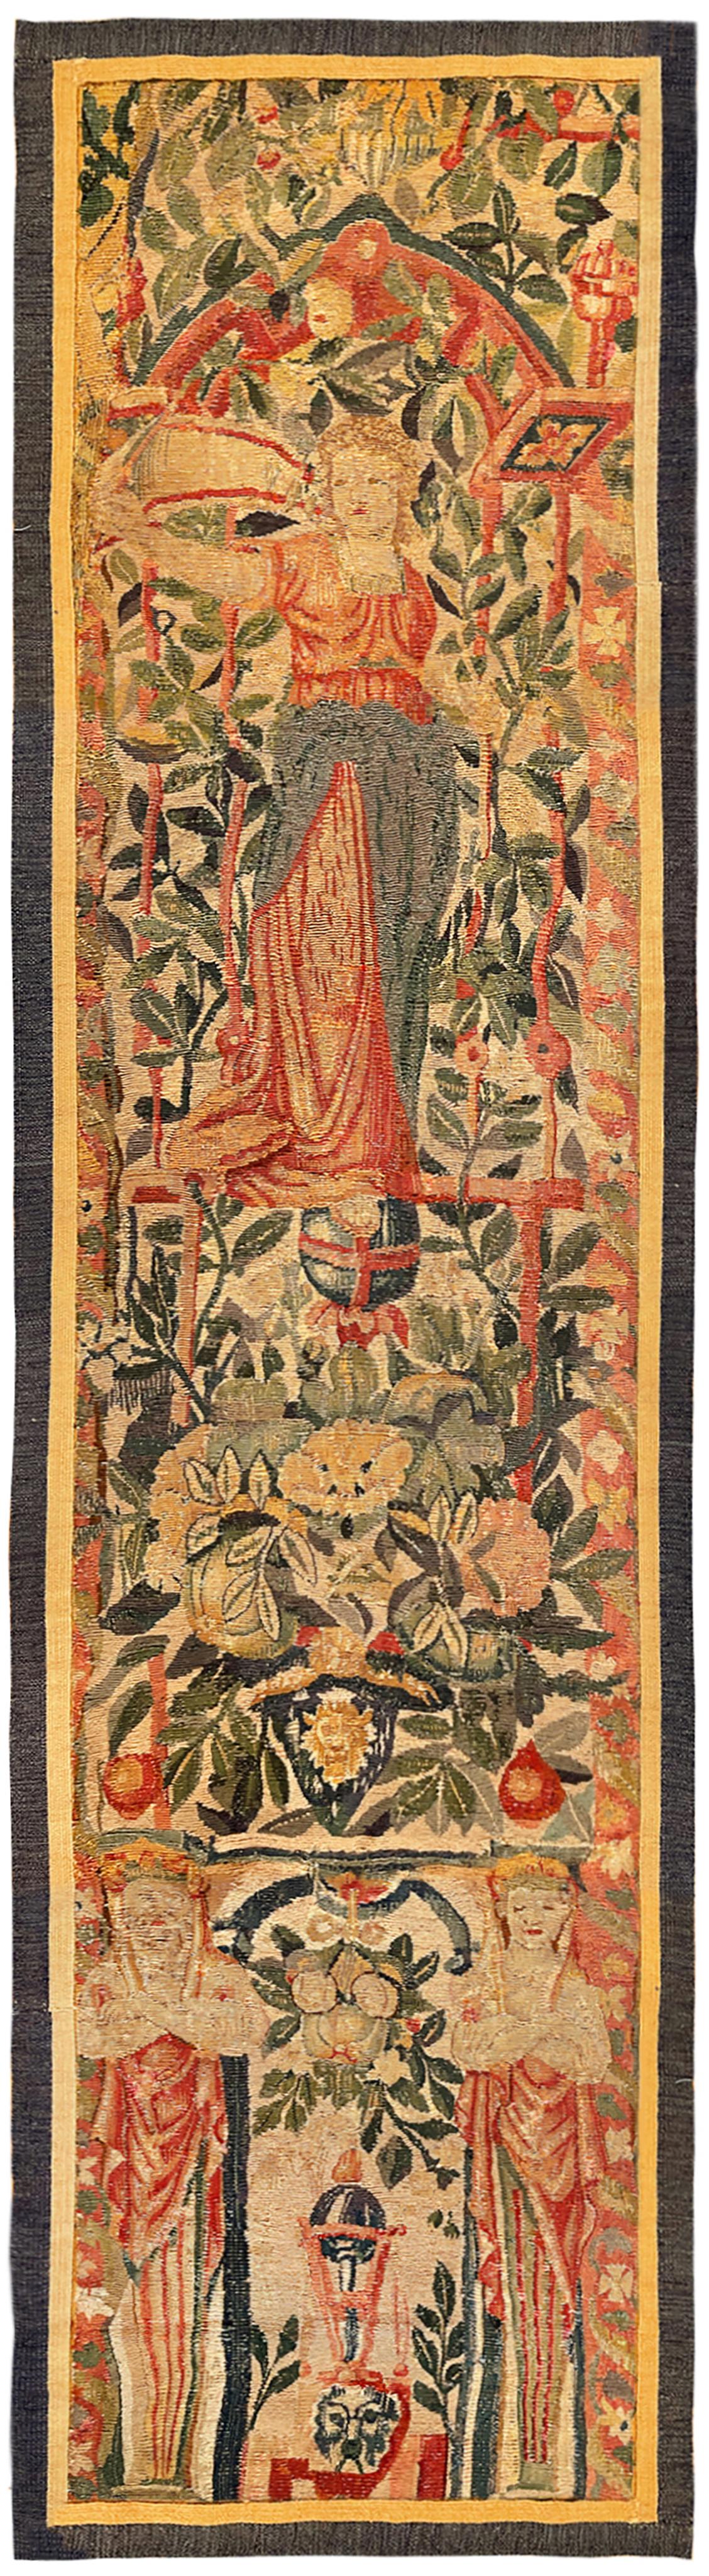 A pair of late 16th century flemish mythological tapestry panels. These vertically oriented decorative tapestry panels depict mythological female figures at top, standing within elaborate floral reserves, with flowers and portions of an arch at